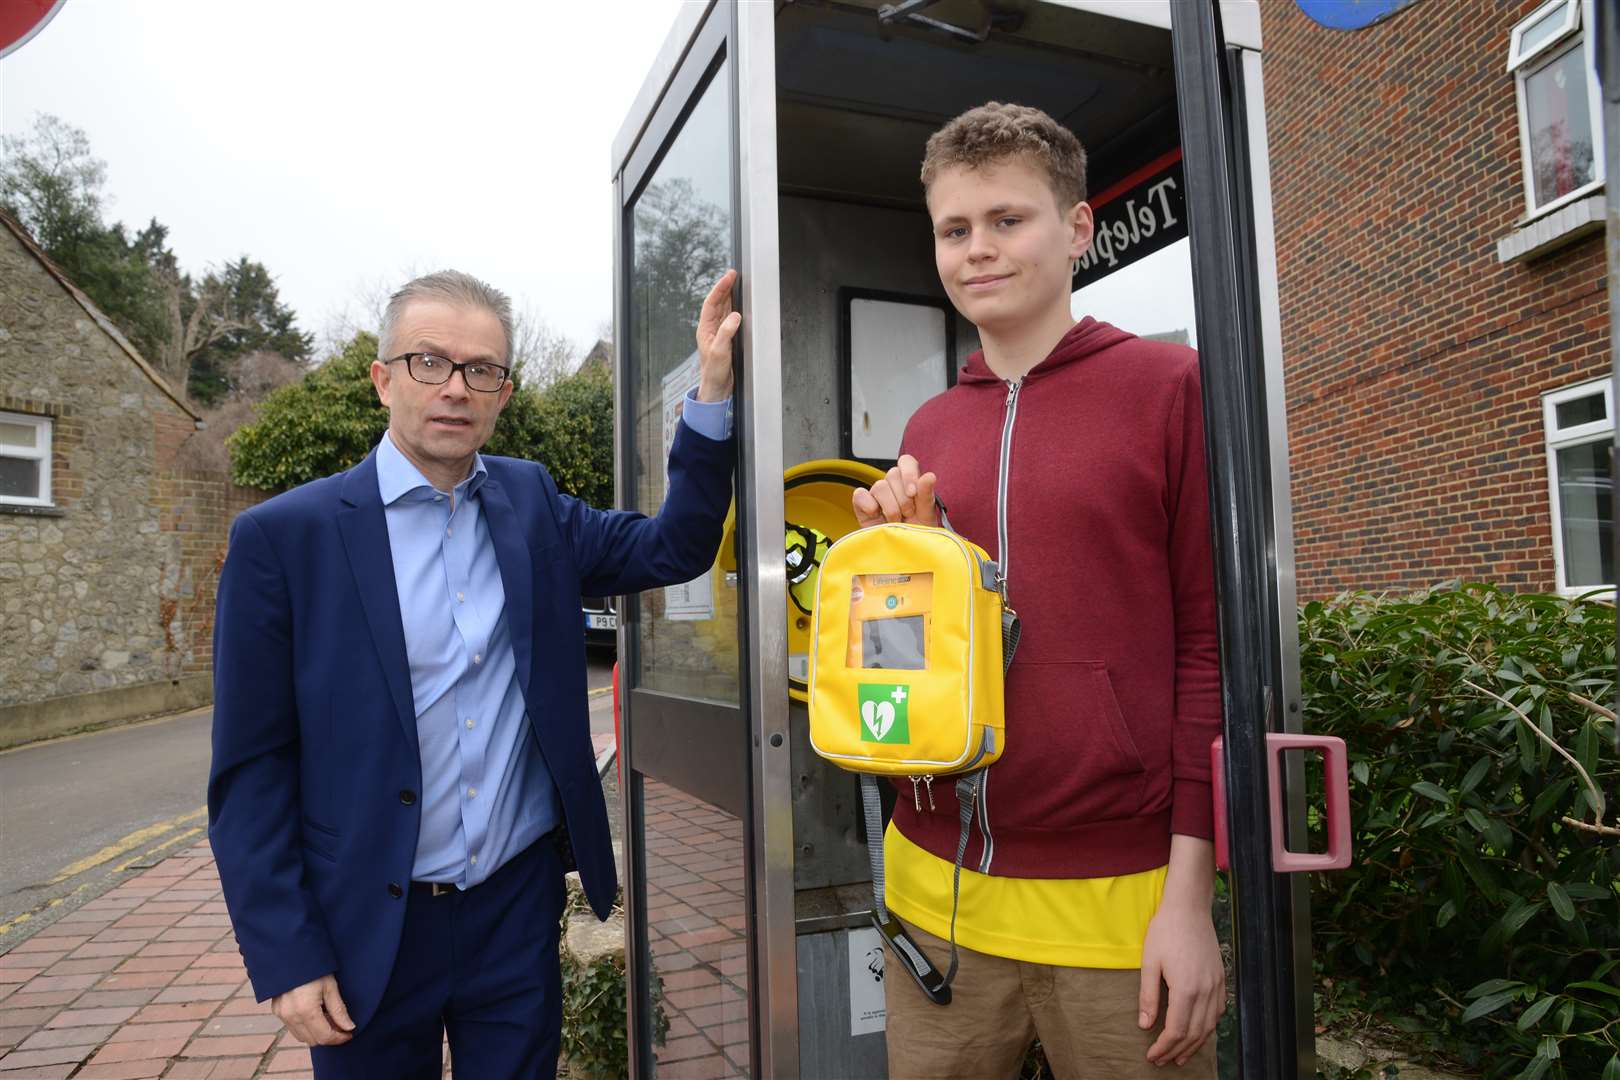 Cllr Trevor Walker and Archie Mitchell, 15 unveiling the new defibrillator fitted in the old phone box.Aylesford village centre.Picture: Gary Browne (1279933)